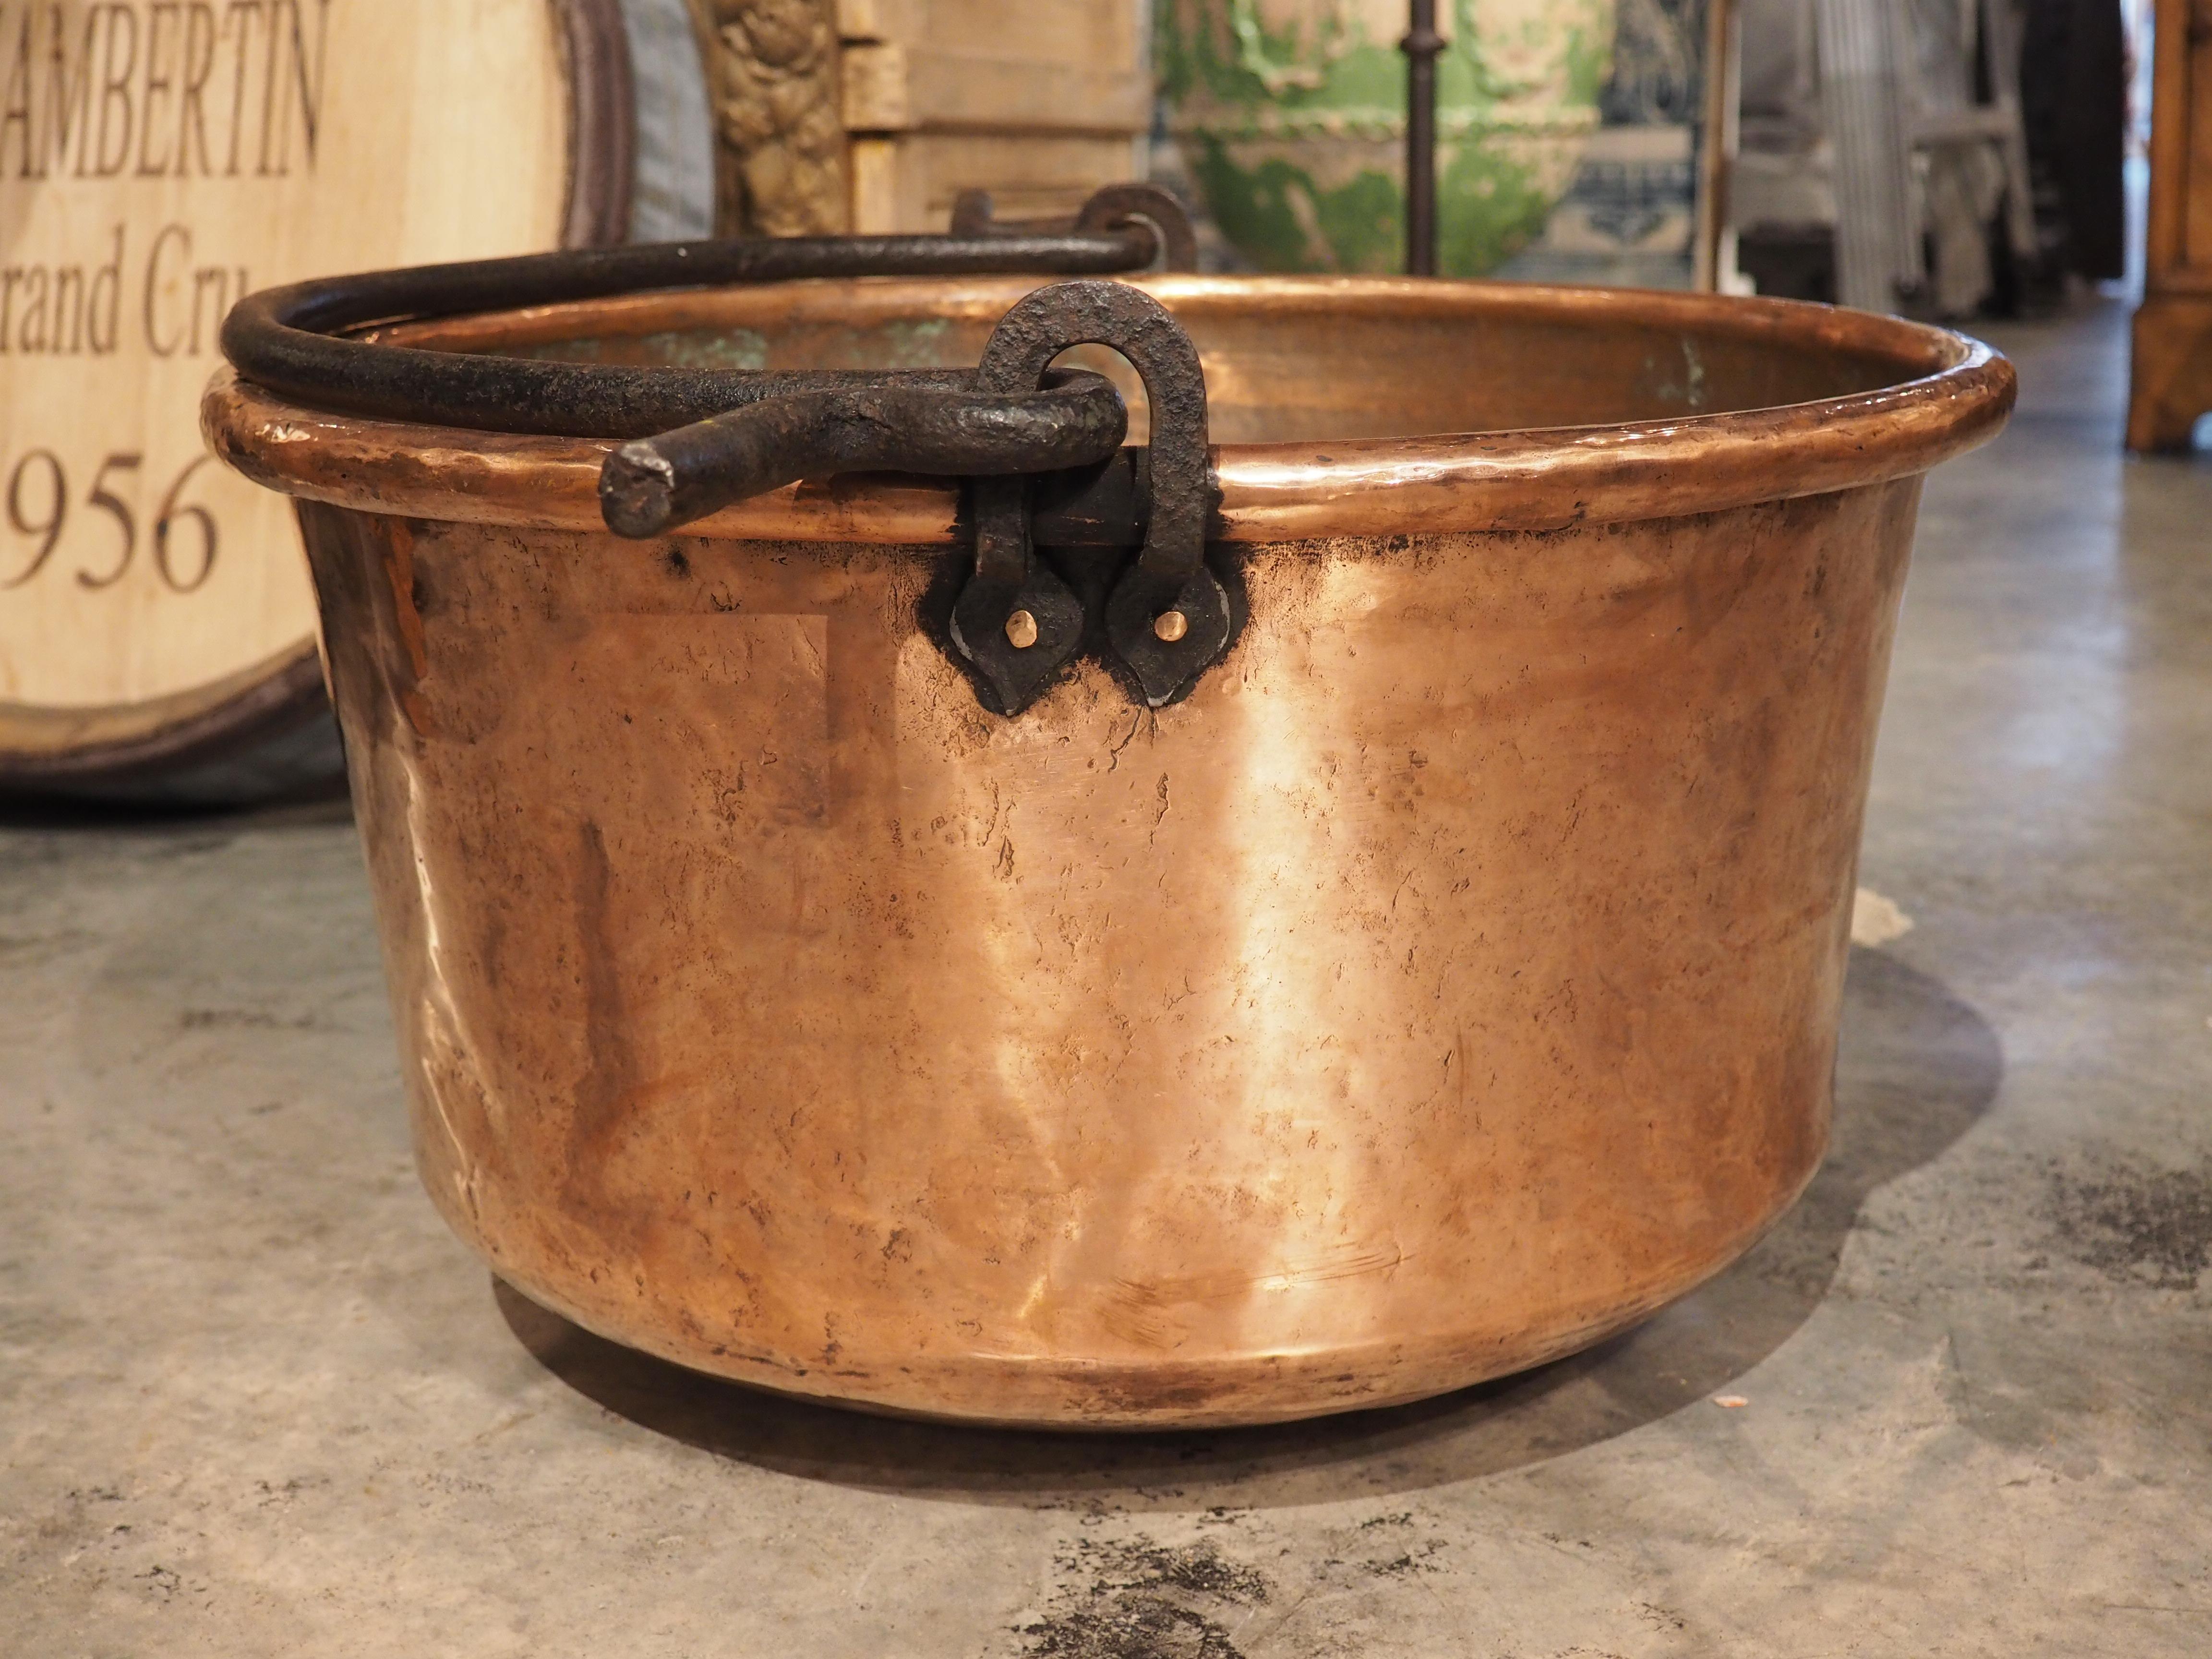 Antique Polished Copper Chaudron or Wine Cooler, Wrought Iron Handle, circa 1850 In Good Condition For Sale In Dallas, TX